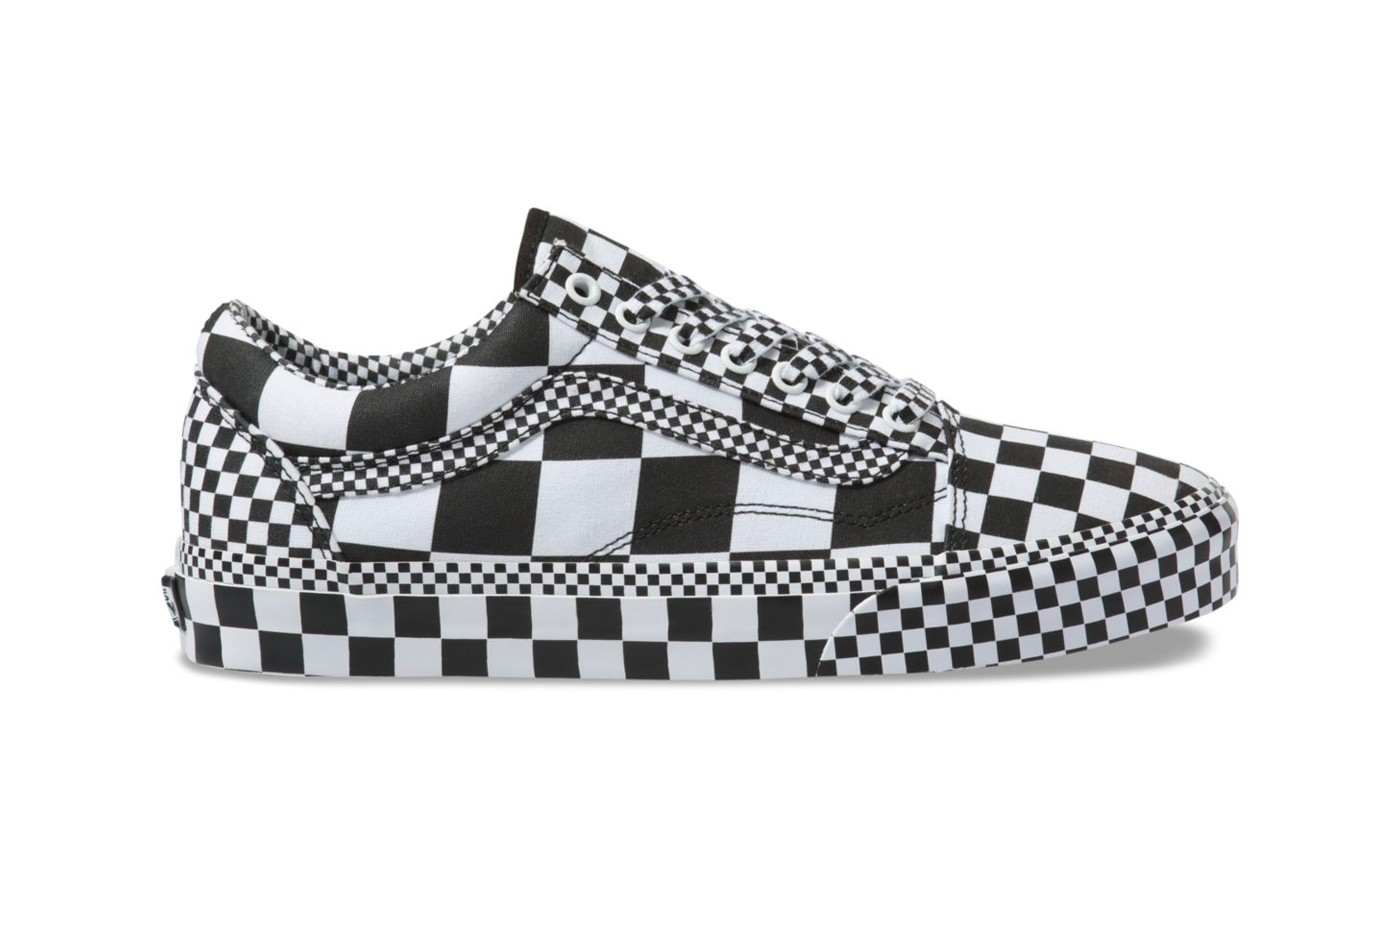 Shop Now: Vans "All Over Checkerboard" | Source